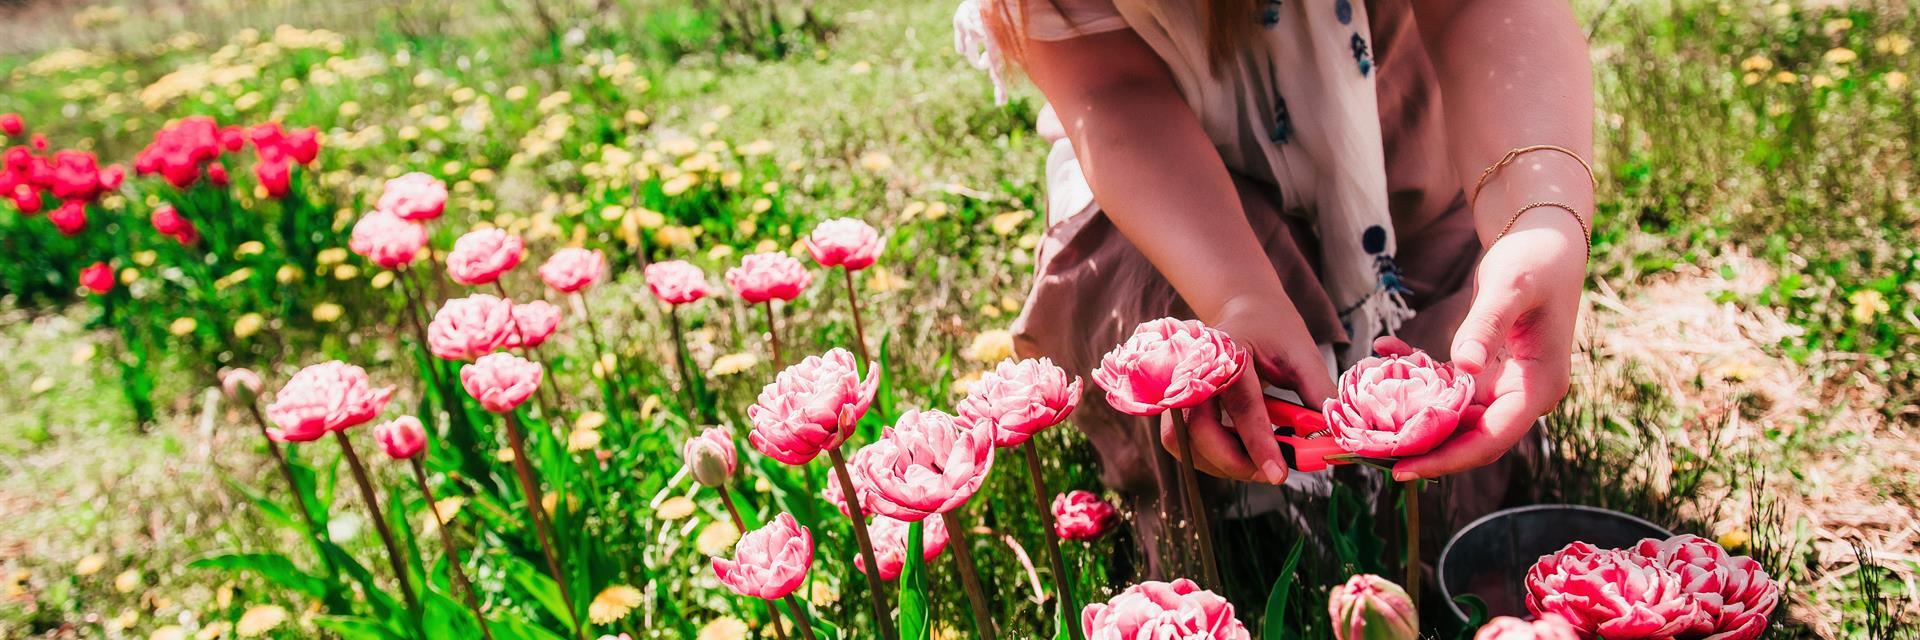 woman holding and looking at tulips in a field